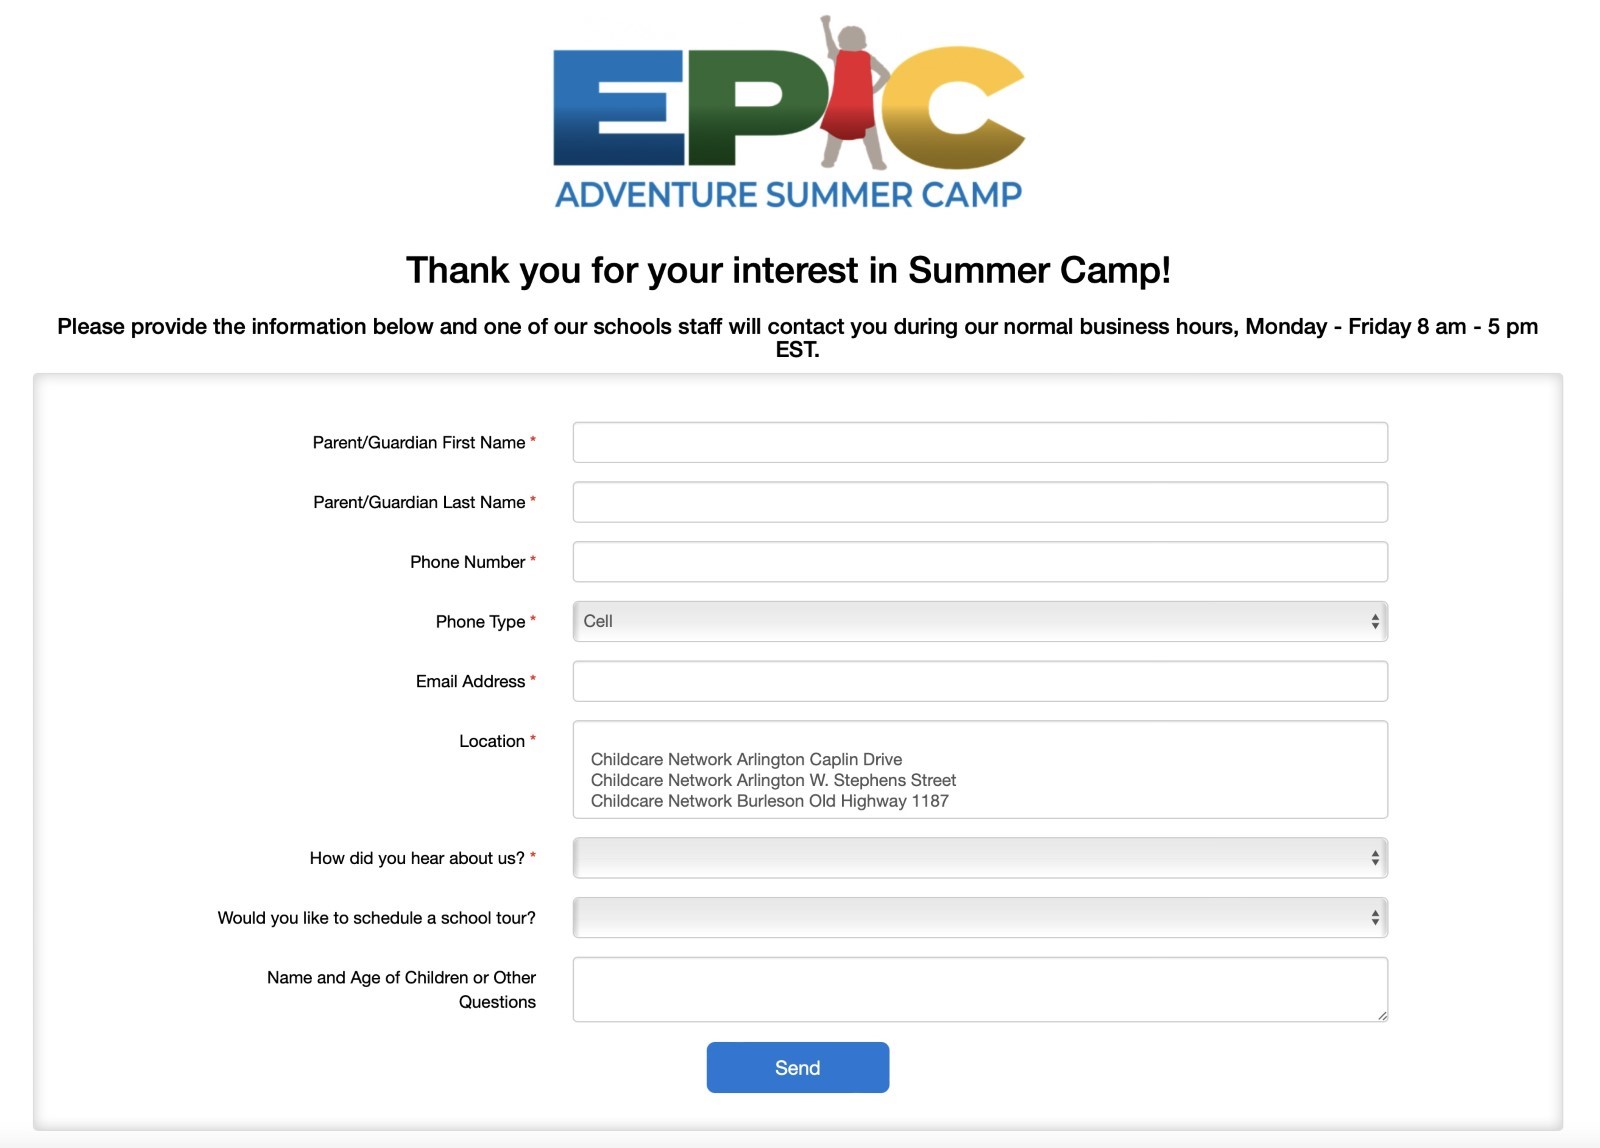 Childcare Network summer camp form 